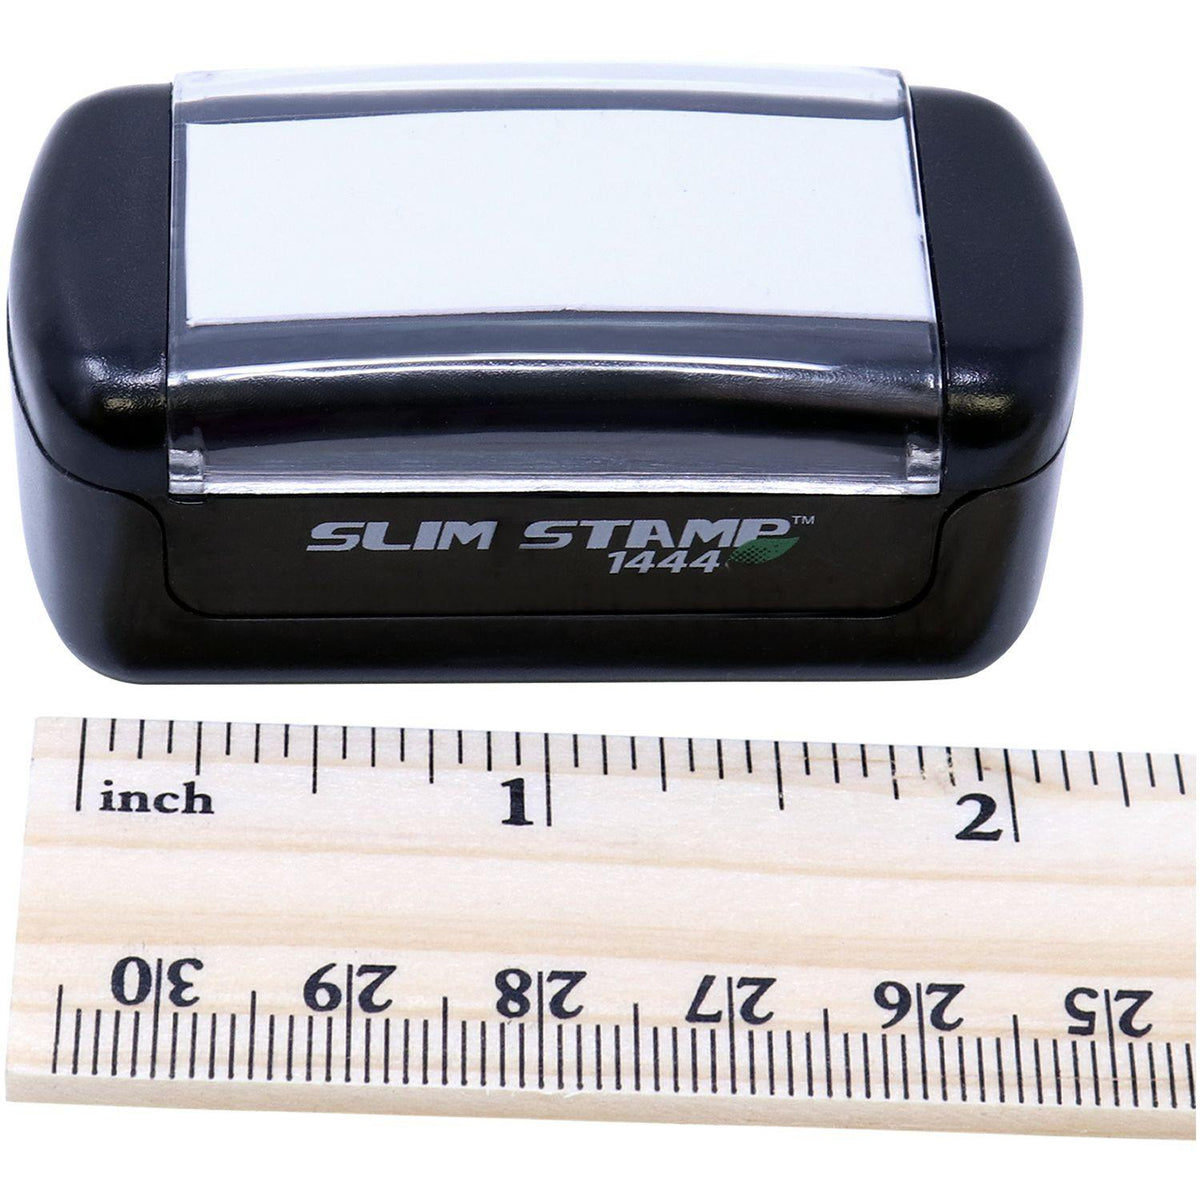 Measurement Slim Pre-Inked Check Your Work Stamp with Ruler